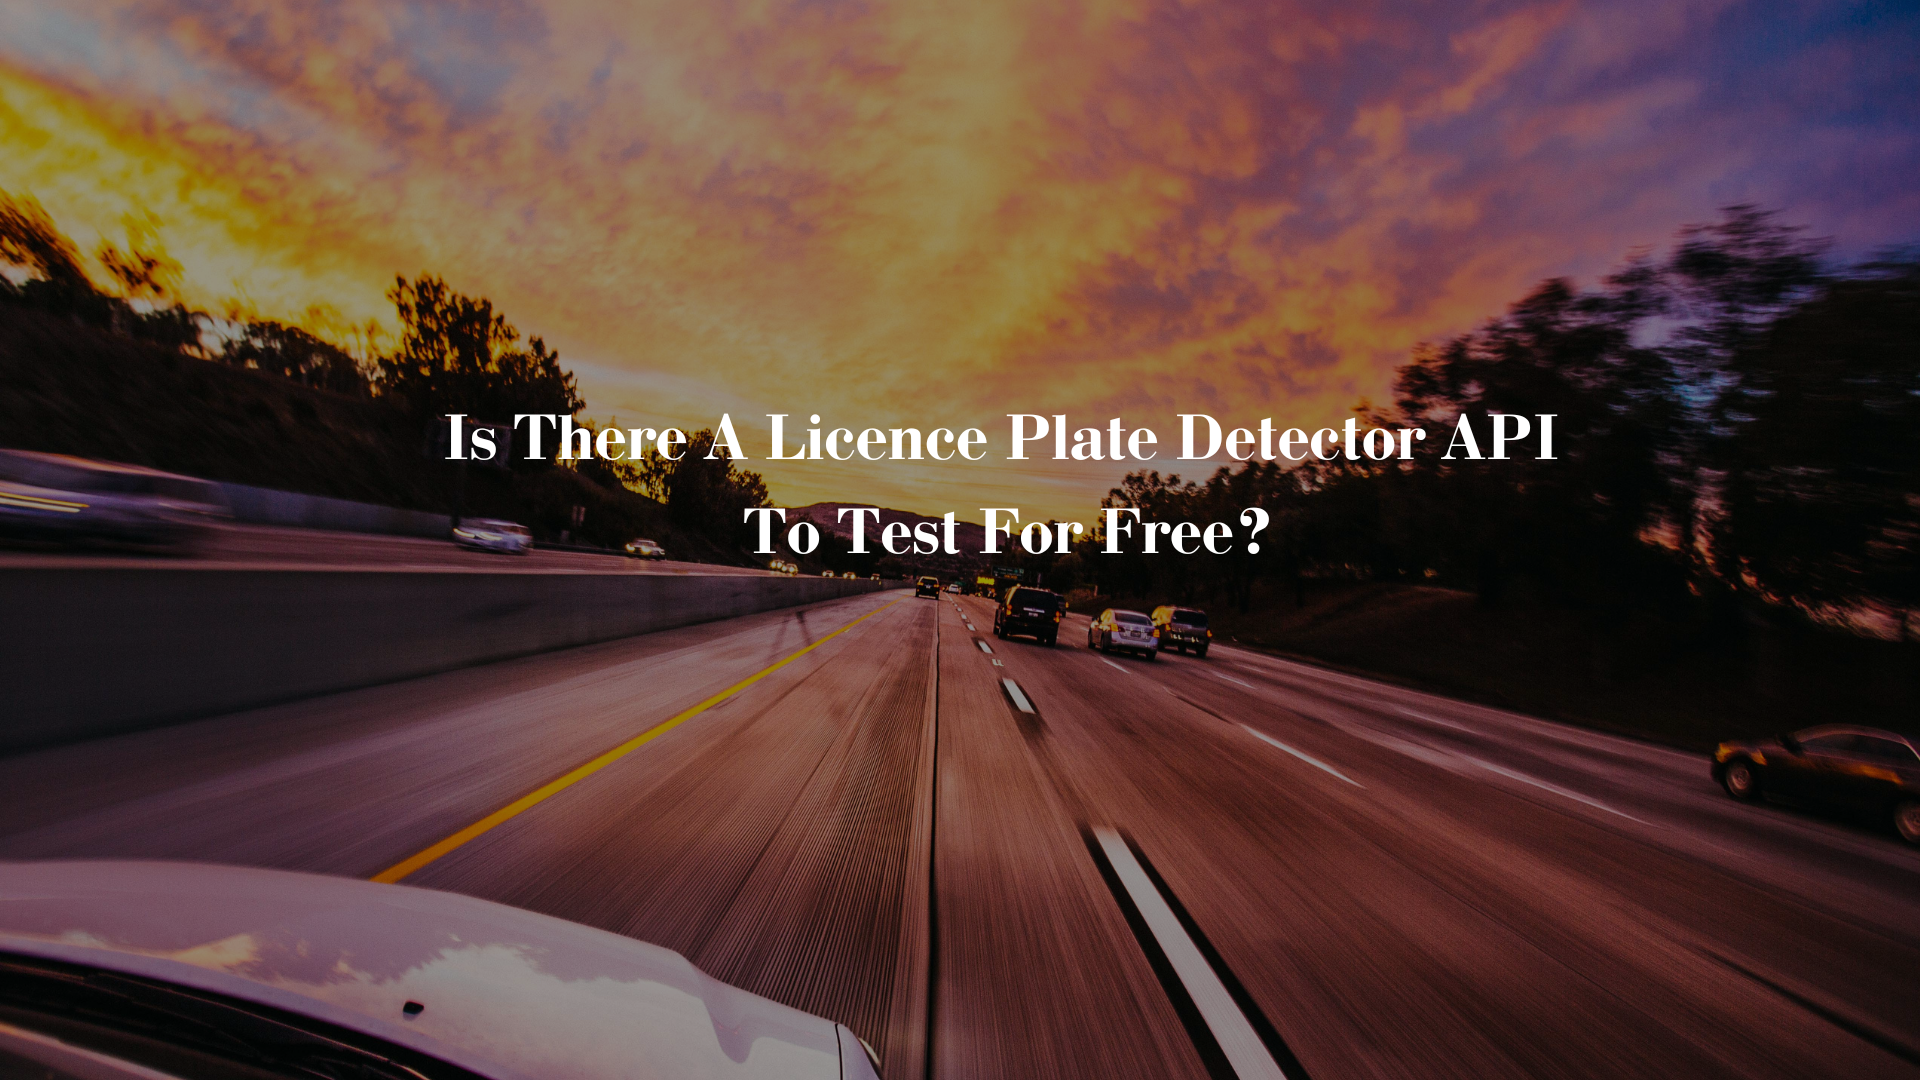 Is There A Licence Plate Detector API To Test For Free?